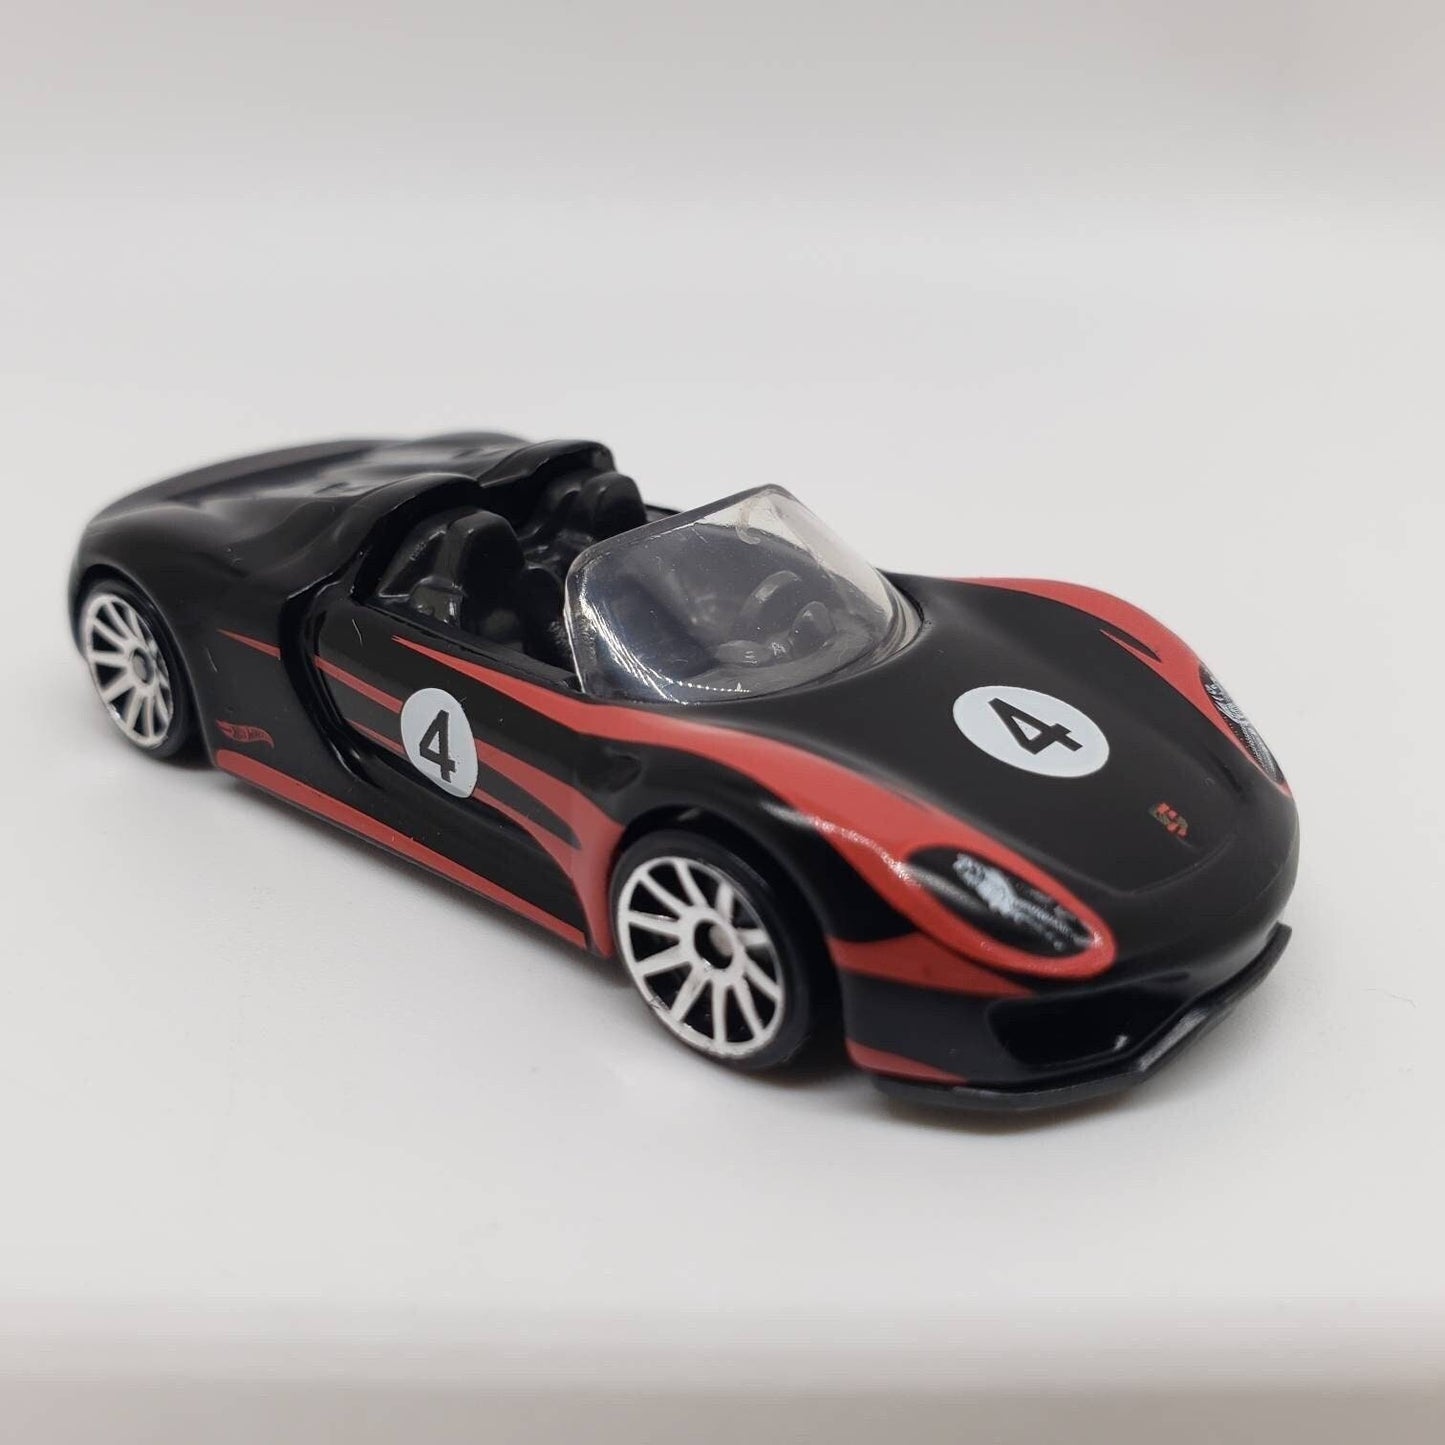 Hot Wheels Porsche 918 Spyder Black HW Roadsters Perfect Birthday Gift Miniature Collectable Model Toy Car